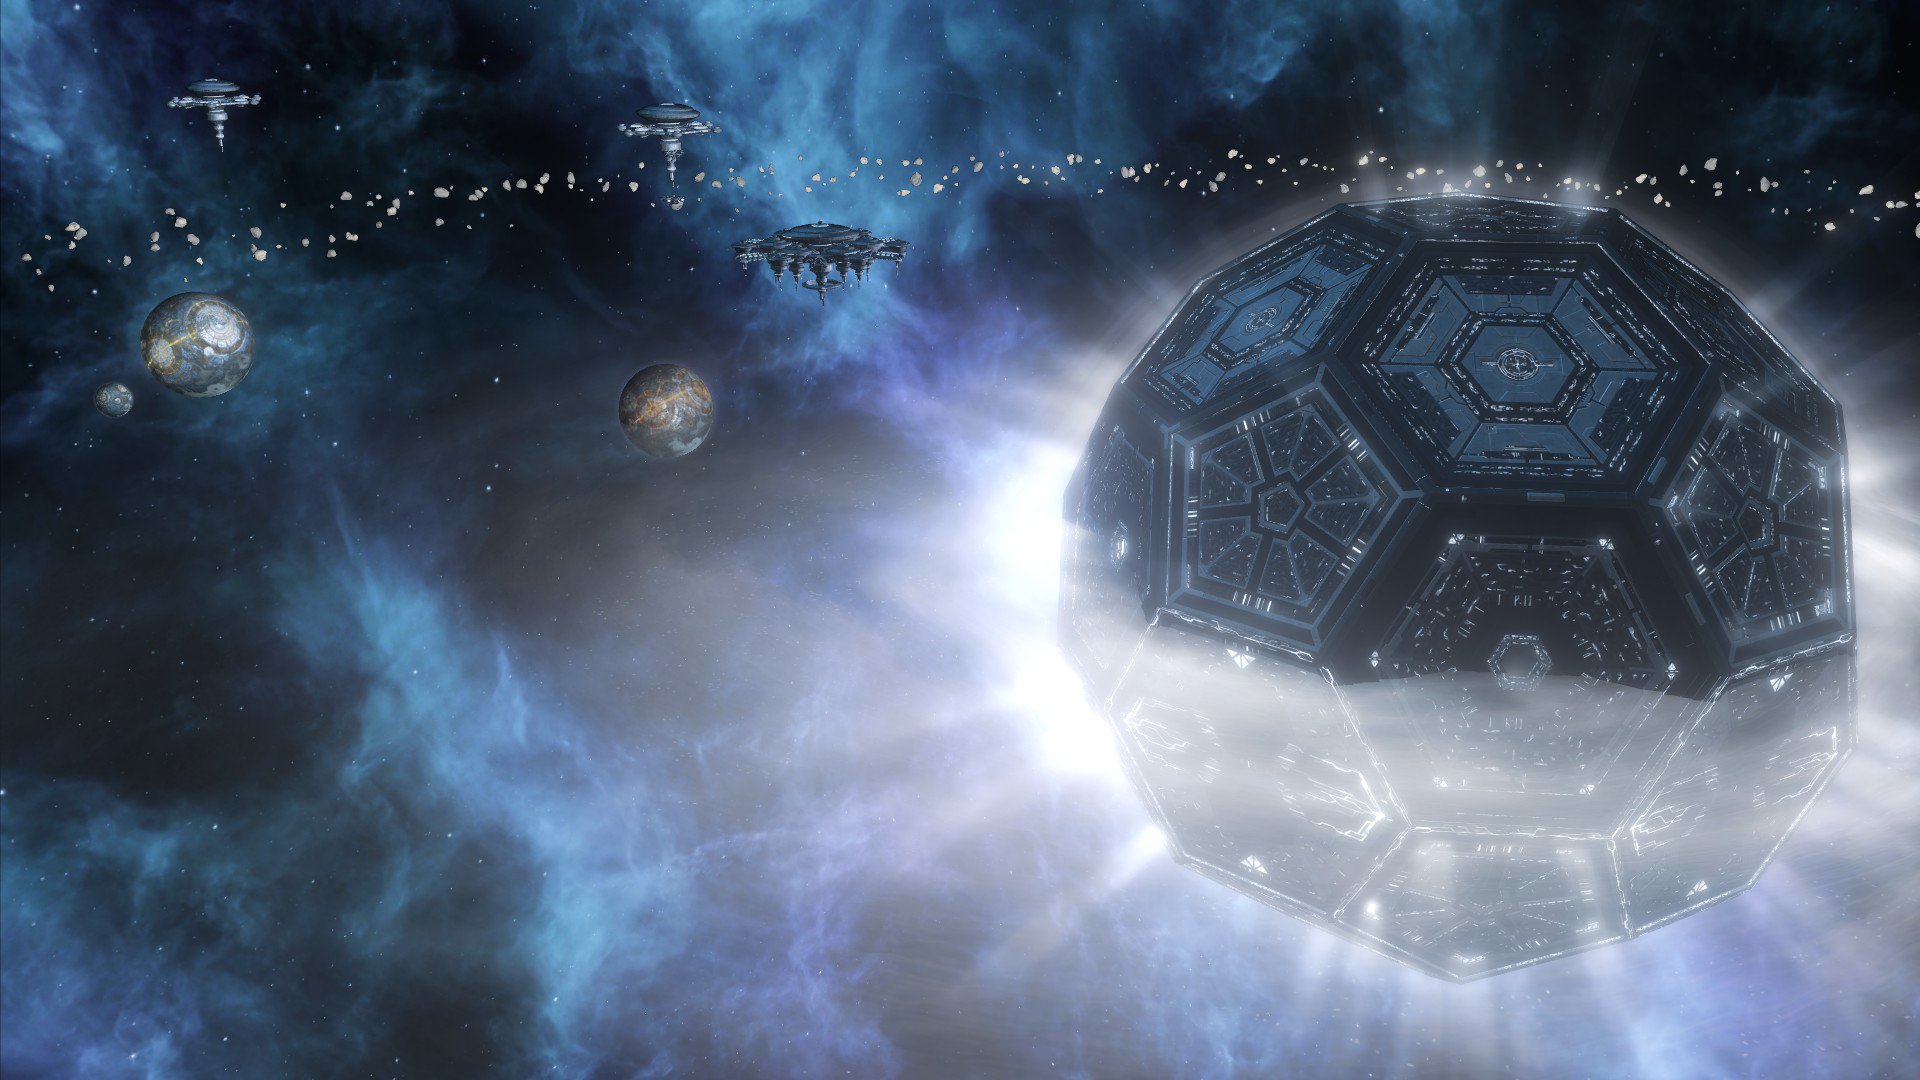 Twitter 上的Stellaris："Did you want to build a Dyson Sphere around a Black Hole? Of course you have! It can be done mods. :) Check out this awesome screenshot and